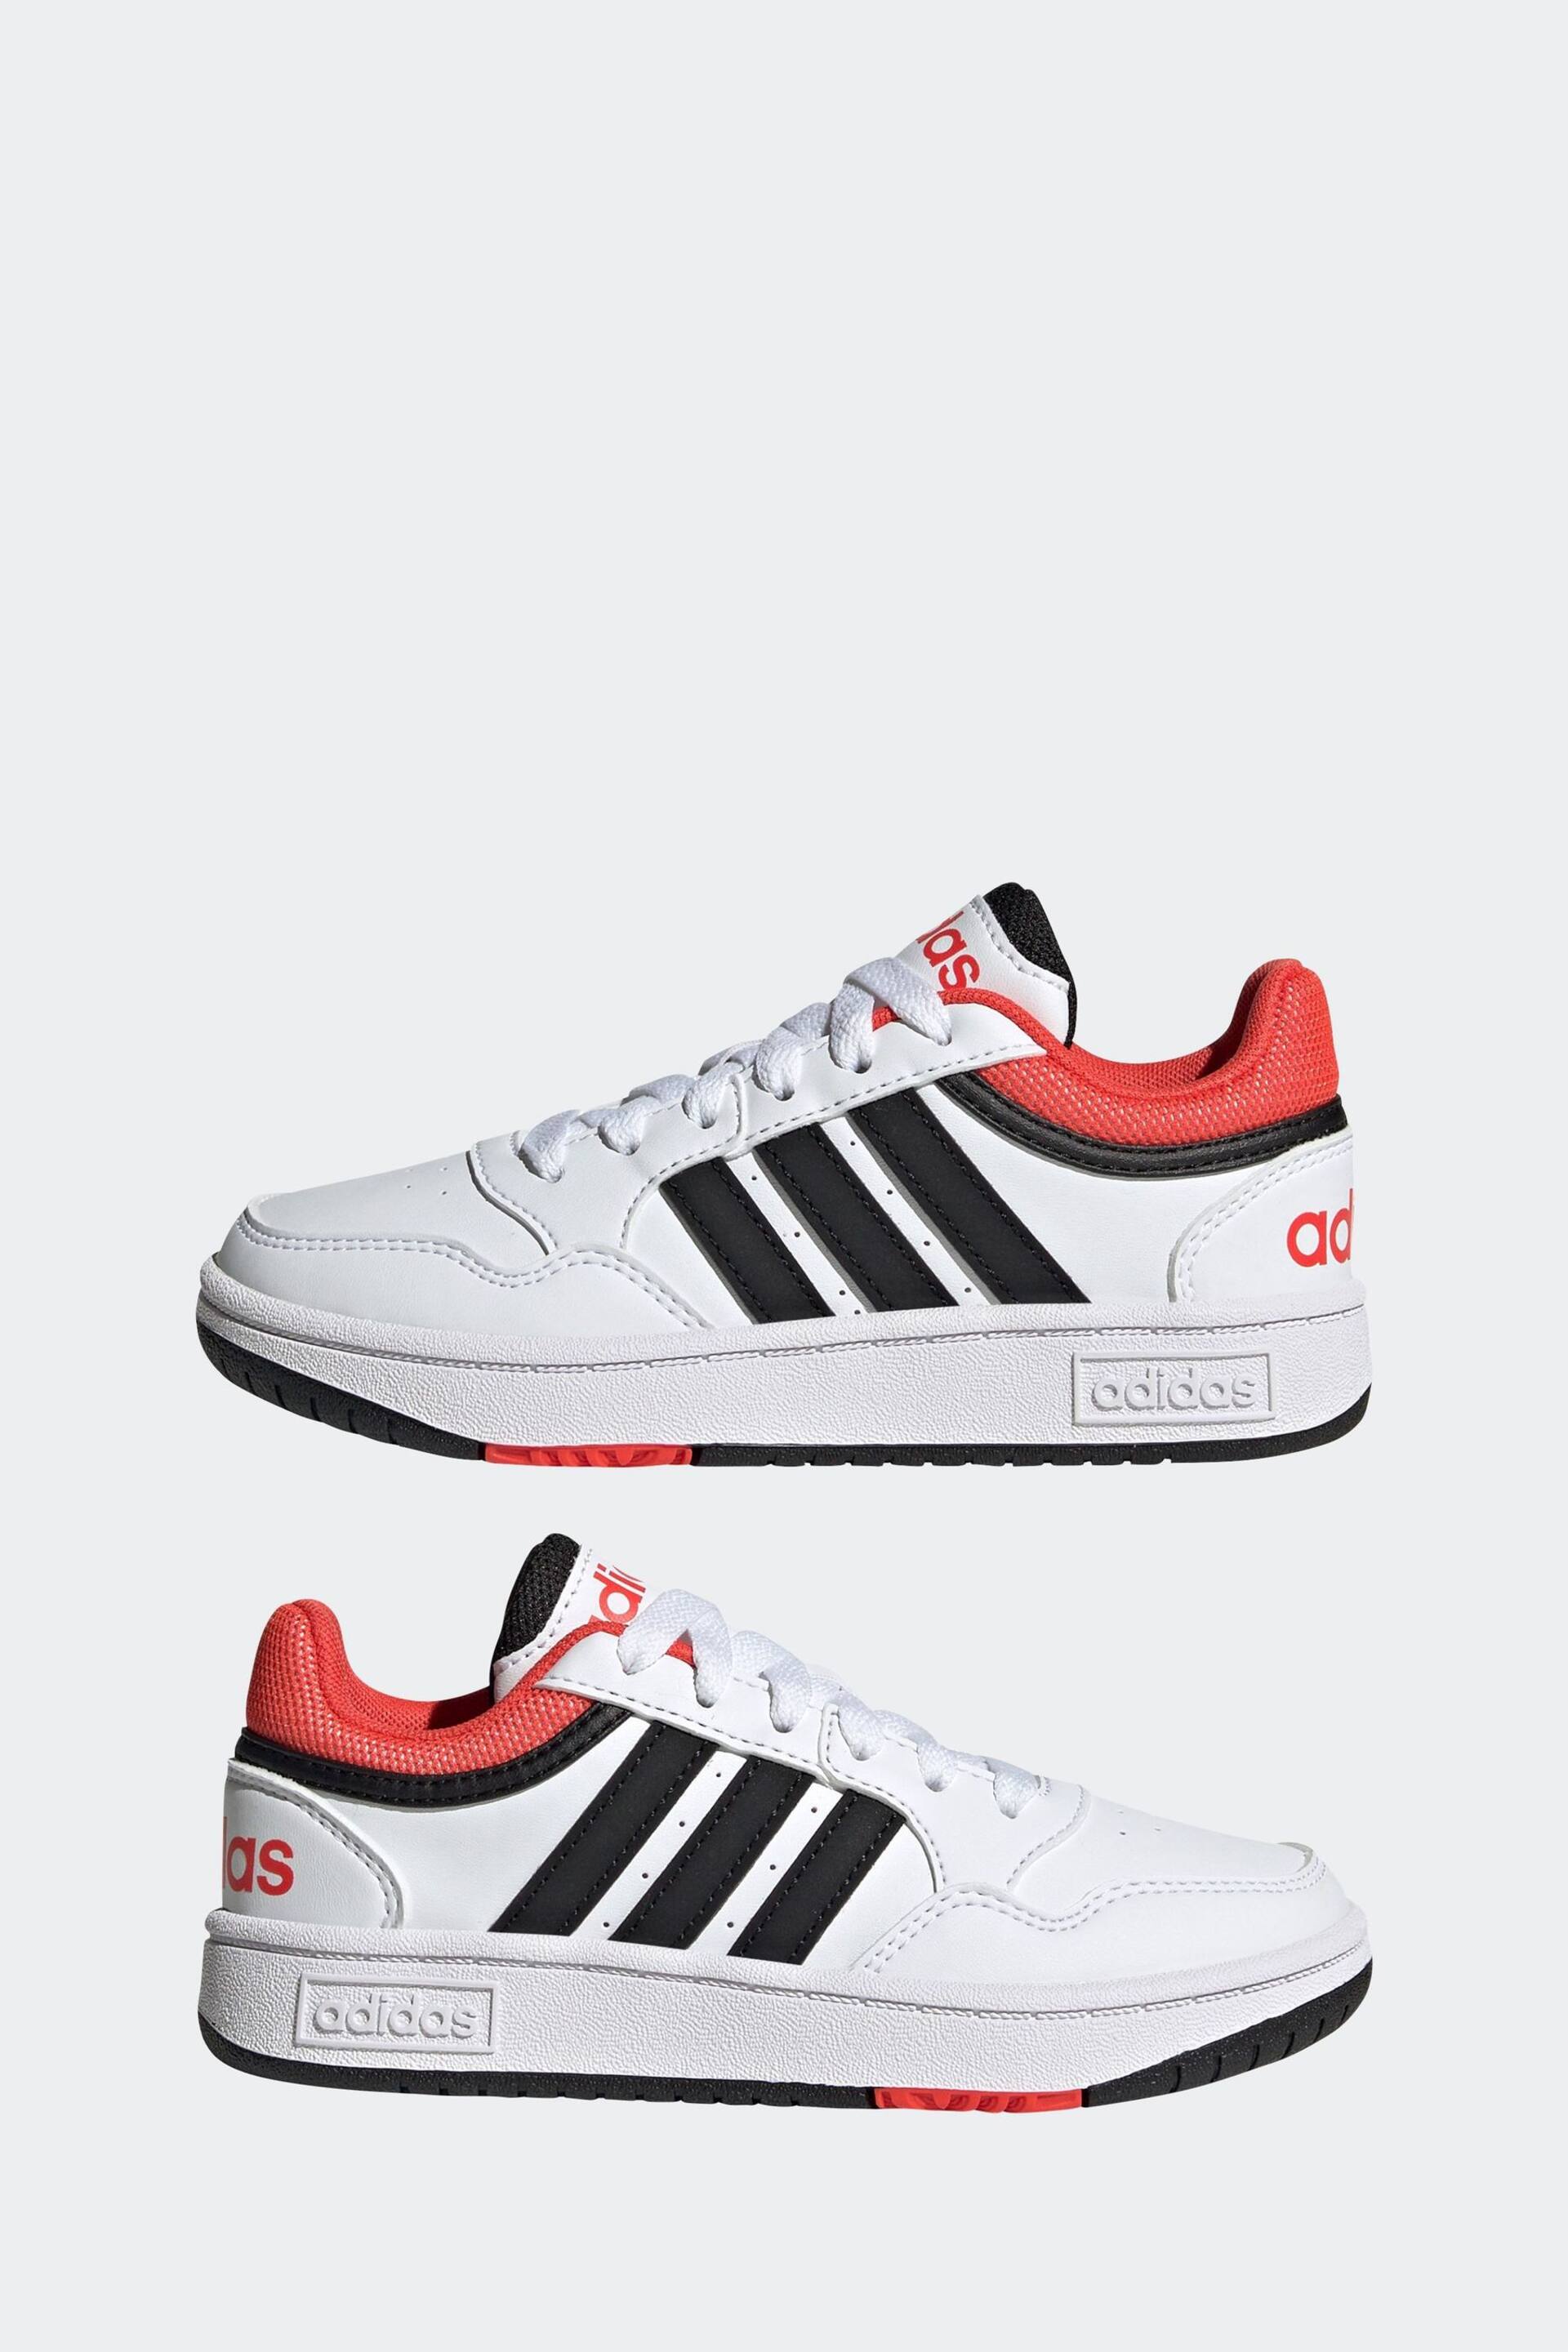 adidas White Hoops Trainers - Image 5 of 9